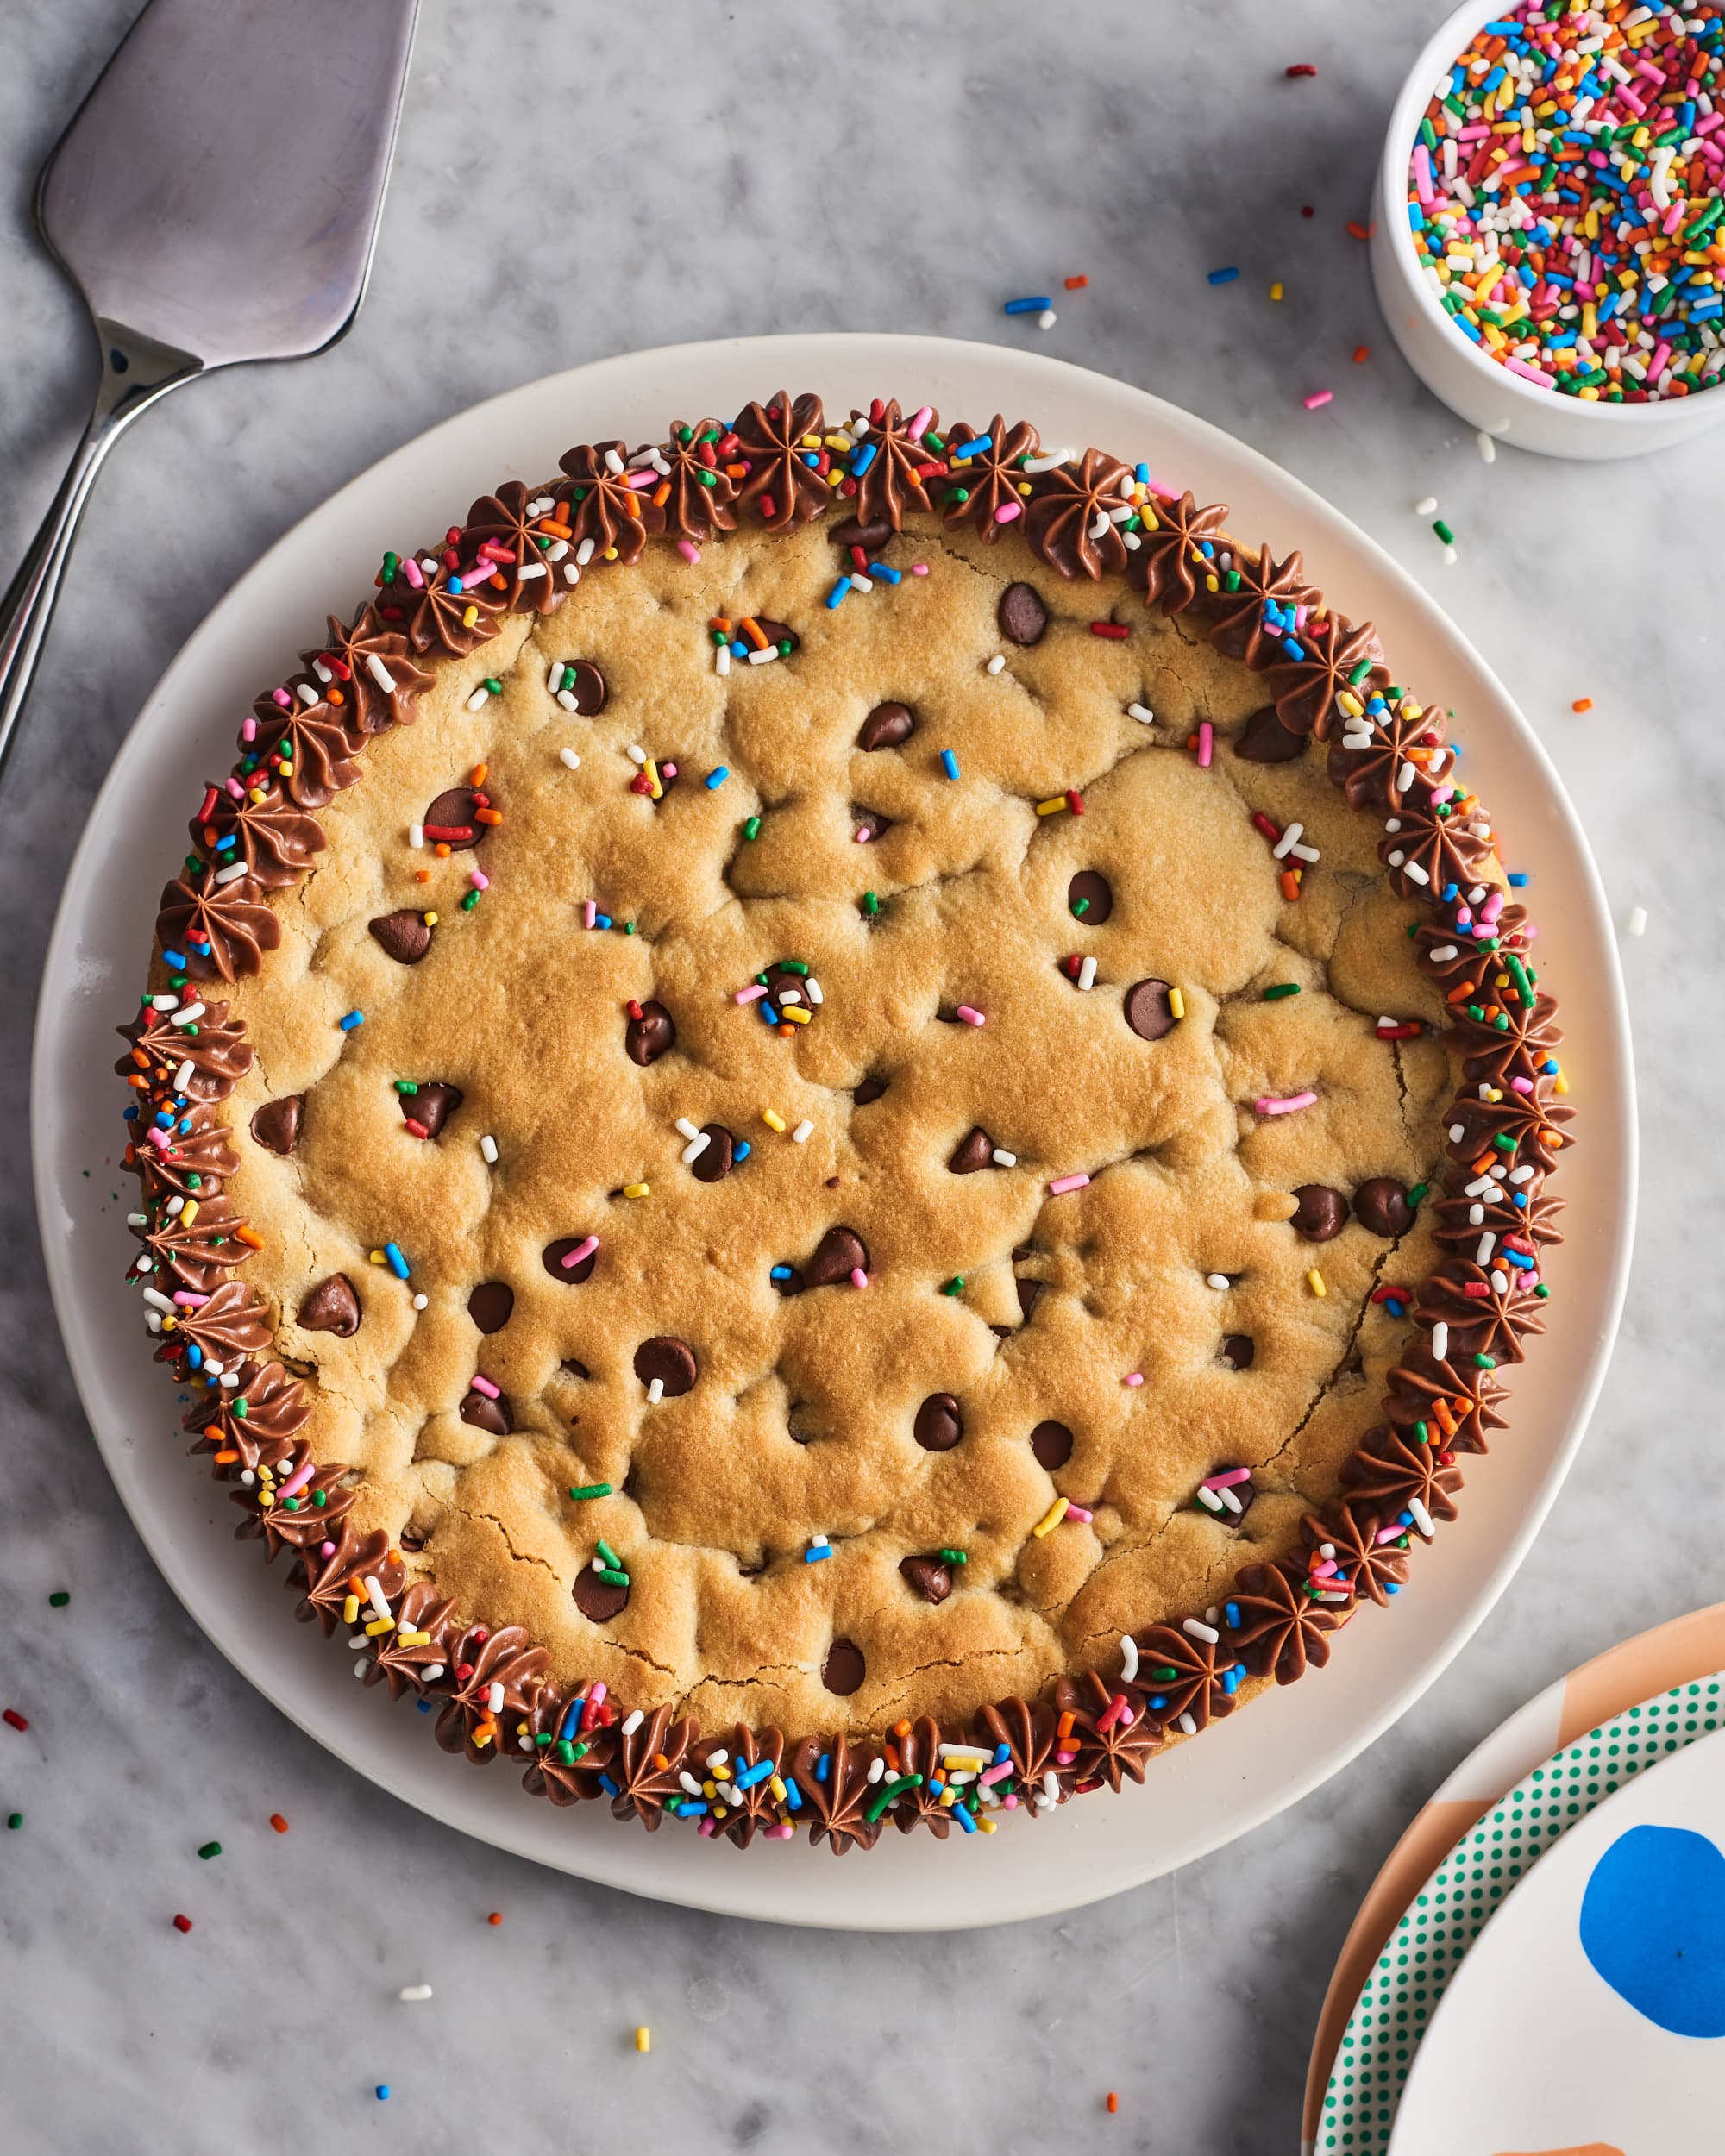 https://cdn.apartmenttherapy.info/image/upload/v1583529726/k/Photo/Recipes/2020-03-Homemade-Chocolate-Chip-Cookie-Cake/Homemade-Chocolate-Chip-Cookie-Cake_001.jpg